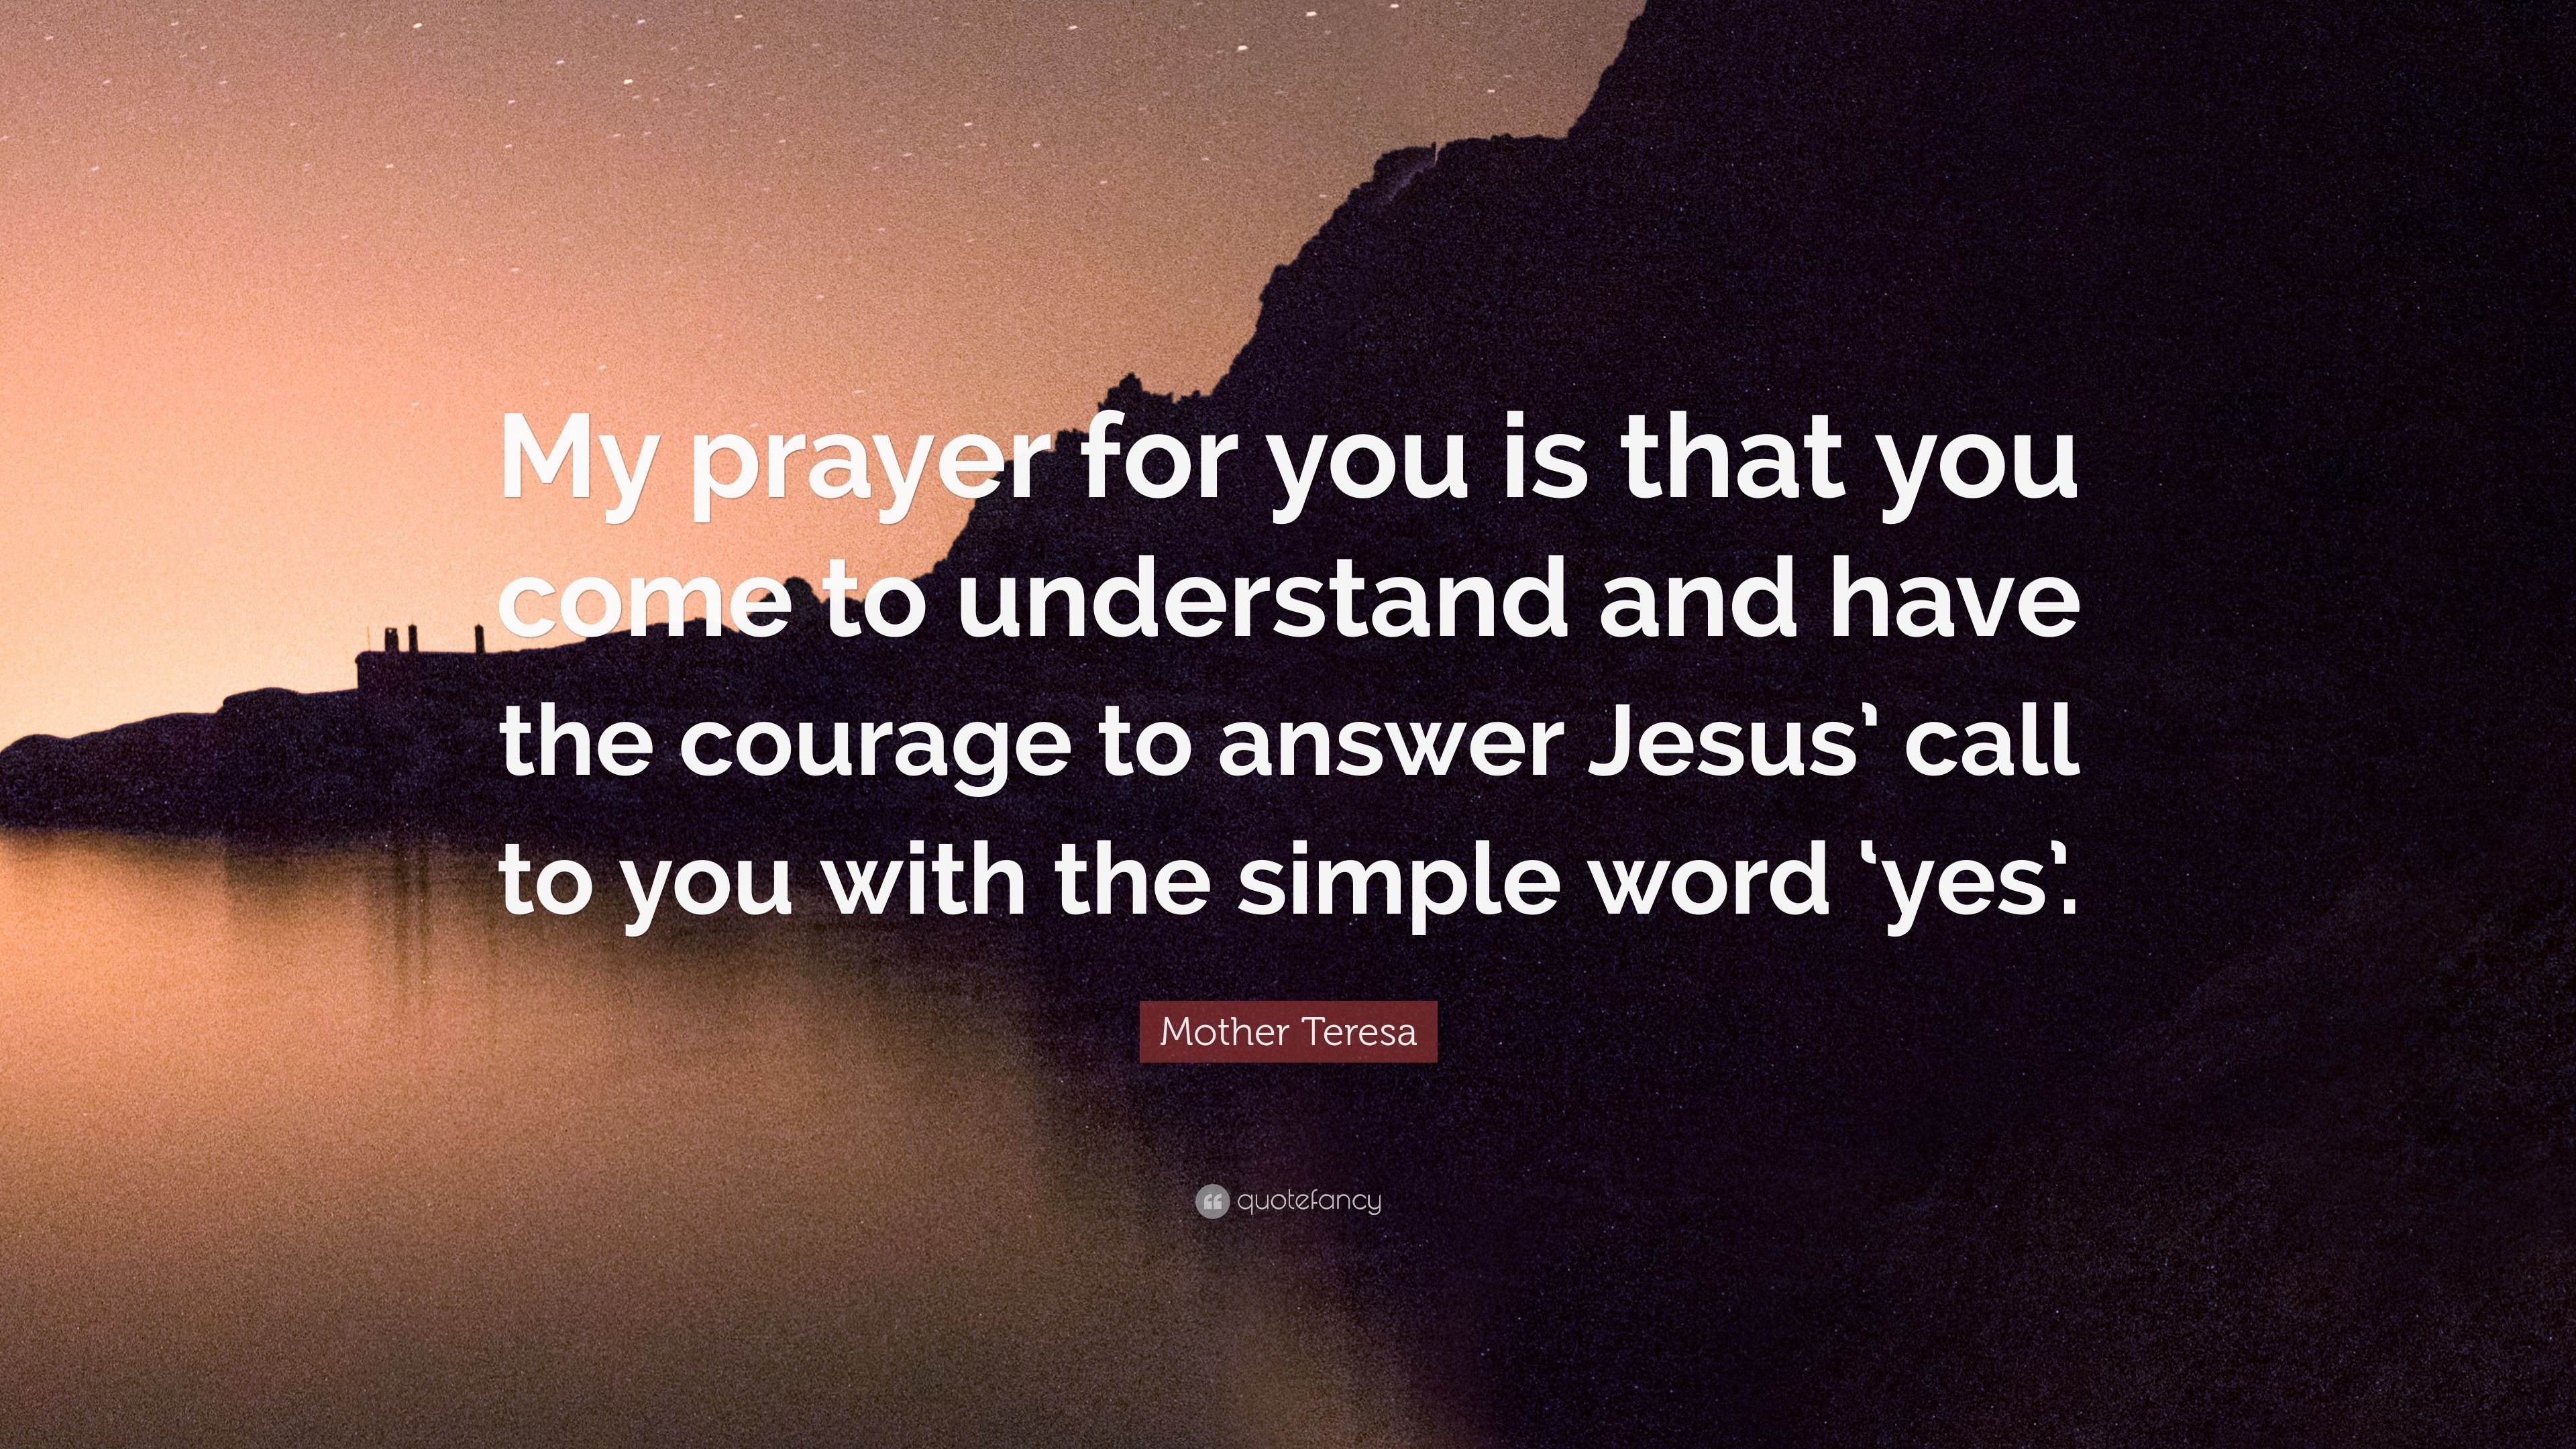 Mother Teresa Quote: "My prayer for you is that you come to 